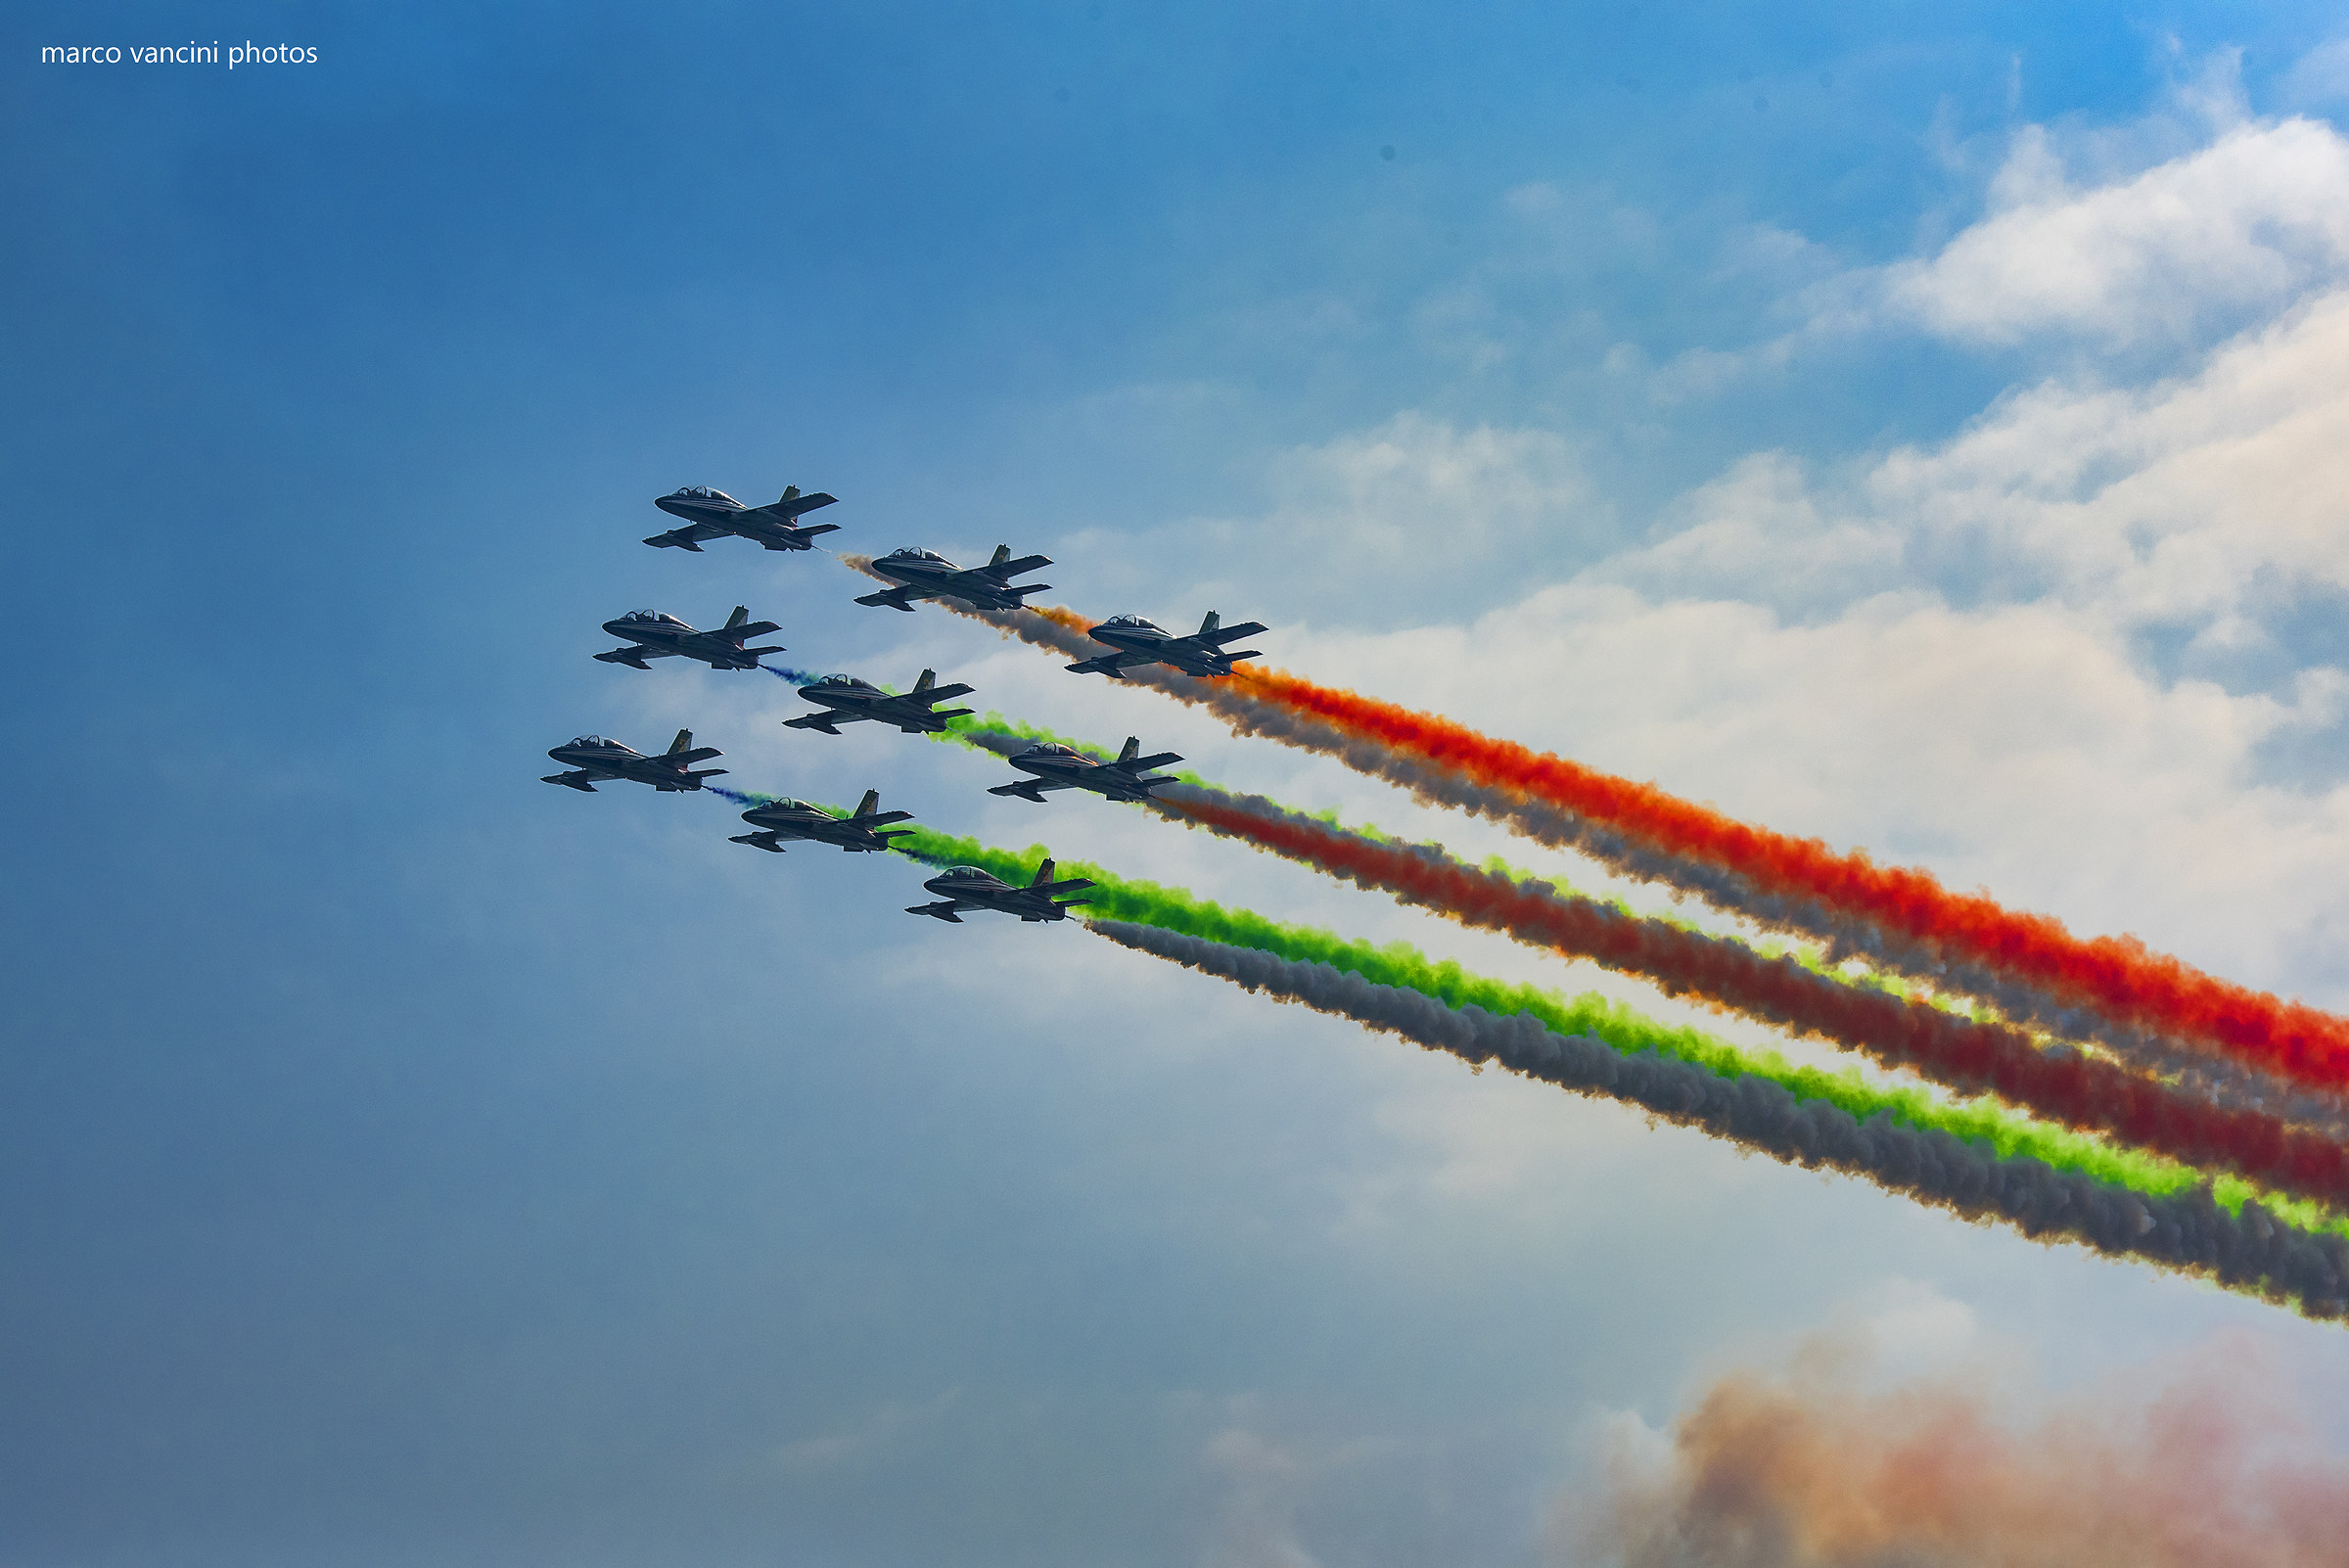 Passage of the tricolor arrows in the sky...